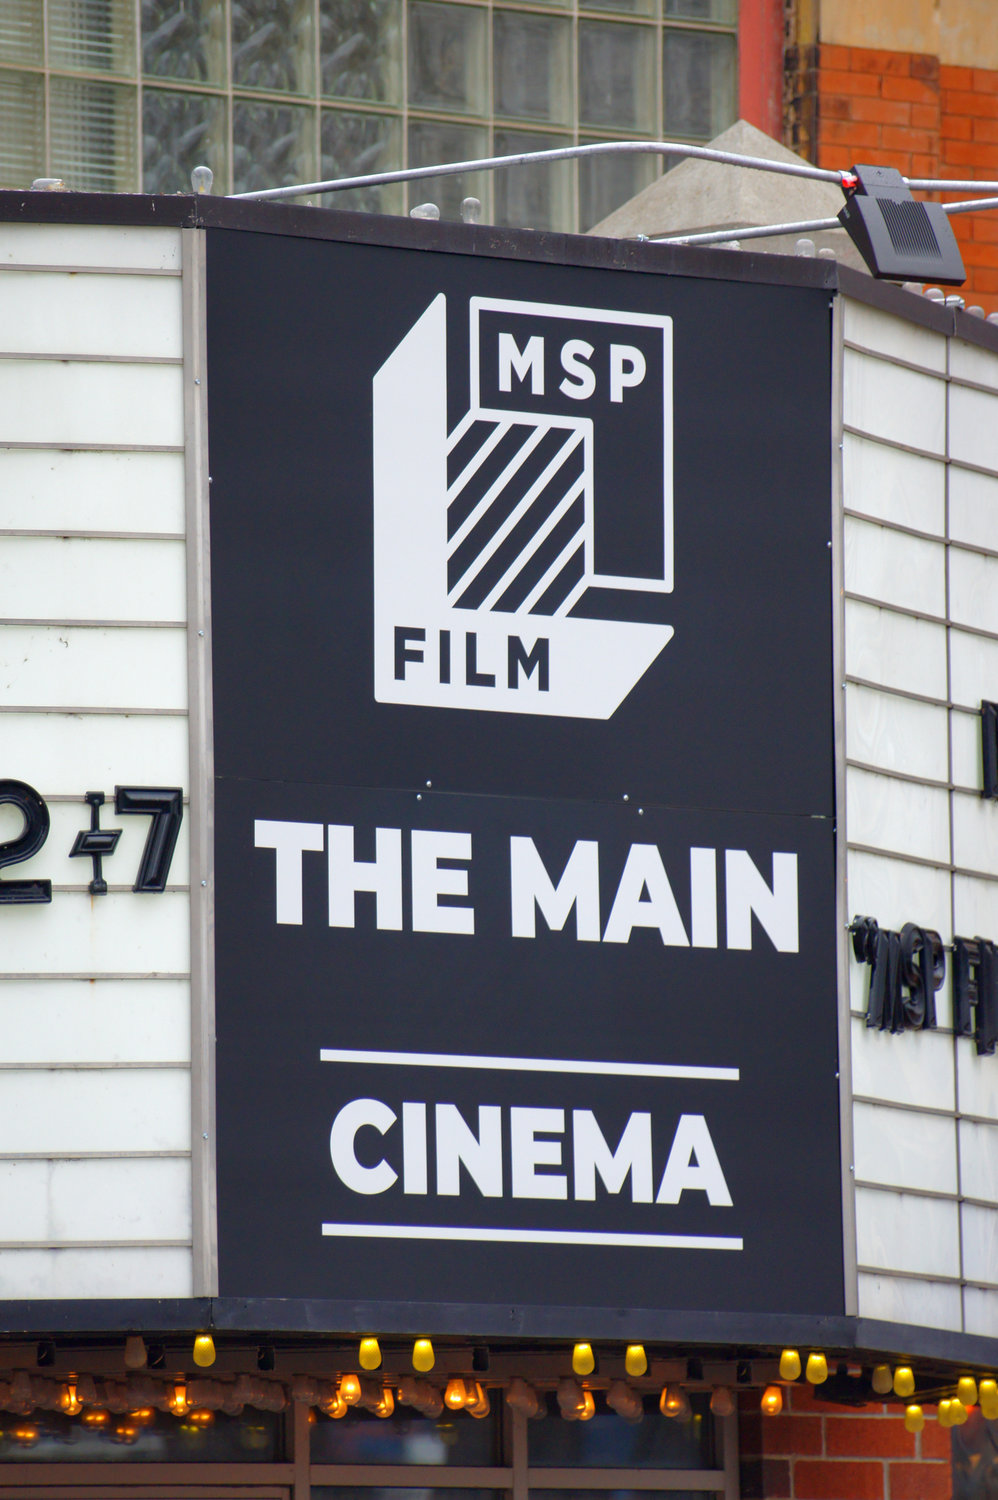 The concessions counter at the theater on 115 SE Main was remodeled. New carpeting was installed on the stair to the second floor, and the second-floor concession stand was removed. The old bulb-illuminated exterior “Main” sign remained, but the marquee below has been remodeled to include the MPS Film Society name. (Photo by Terry Faust)